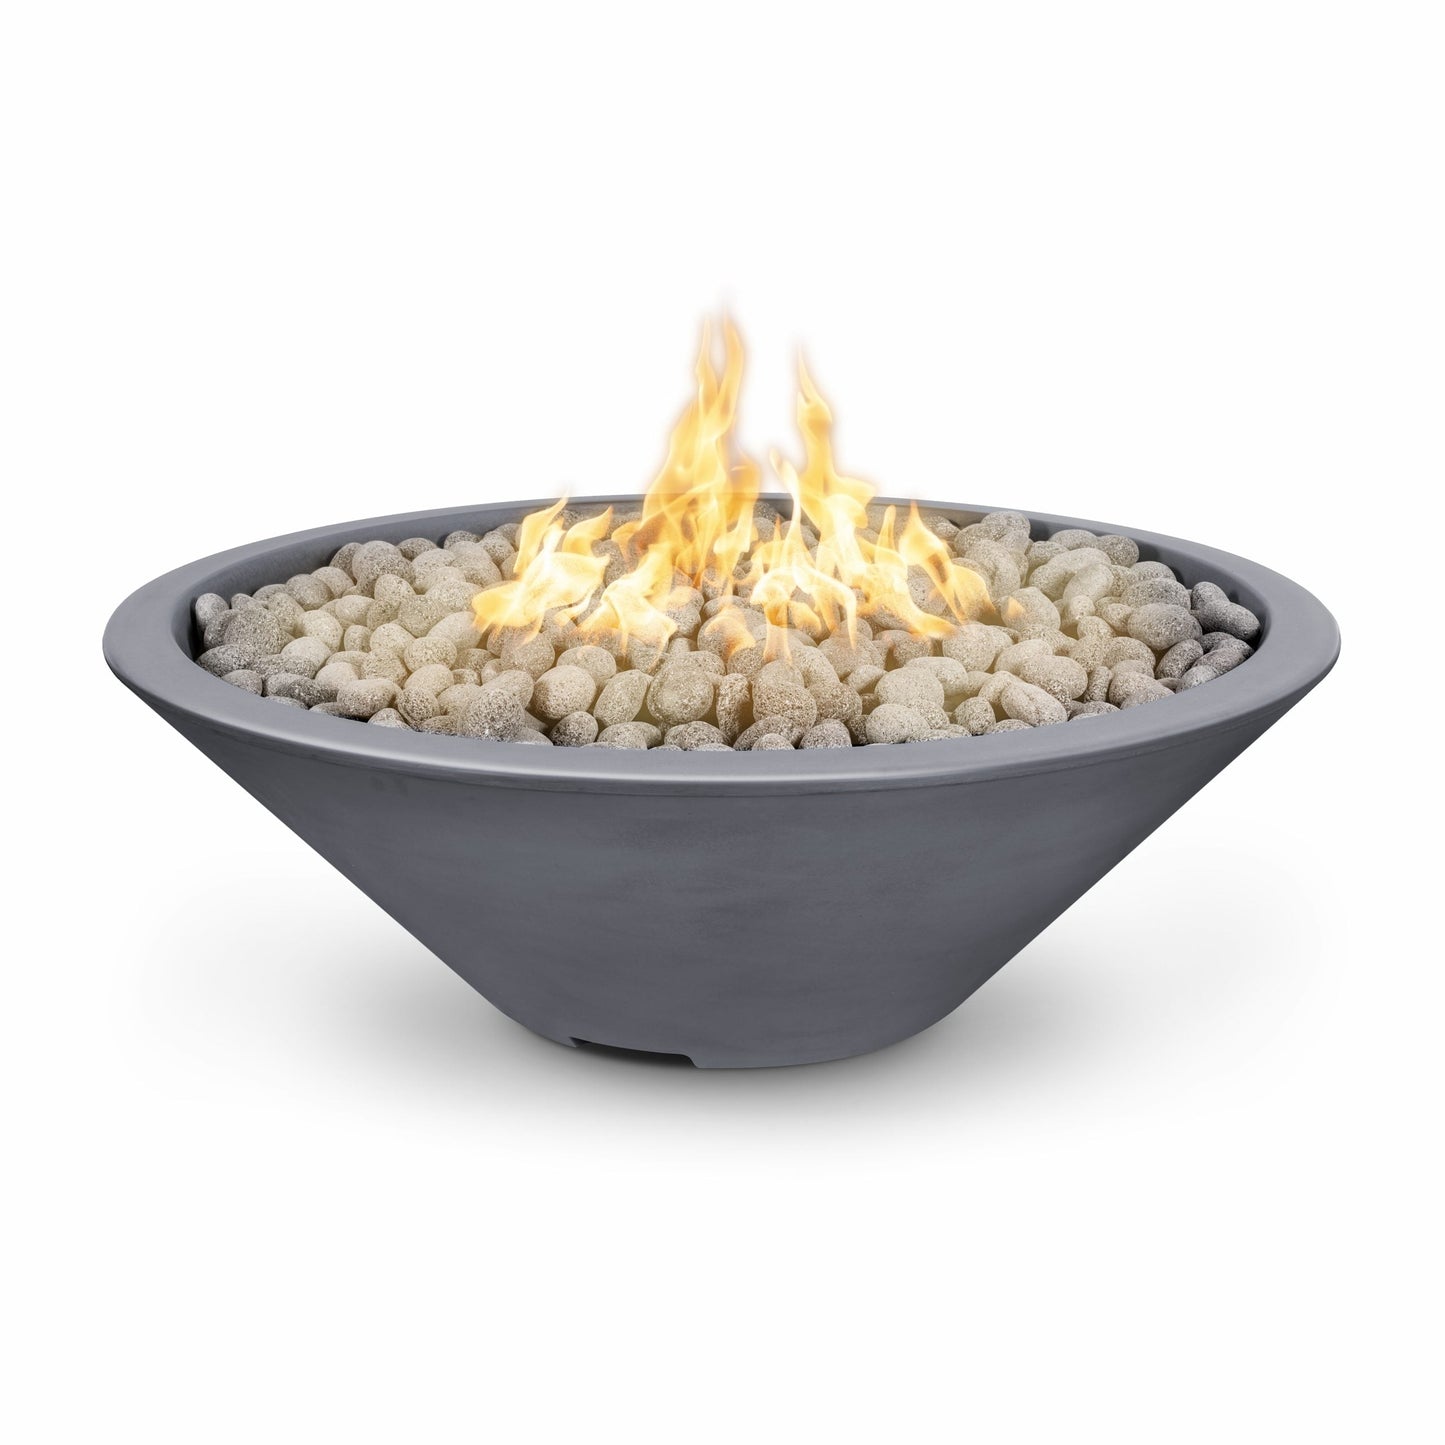 The Outdoor Plus Round Cazo 48" Java Powder Coated Metal Liquid Propane Fire Pit with 110V Electronic Ignition